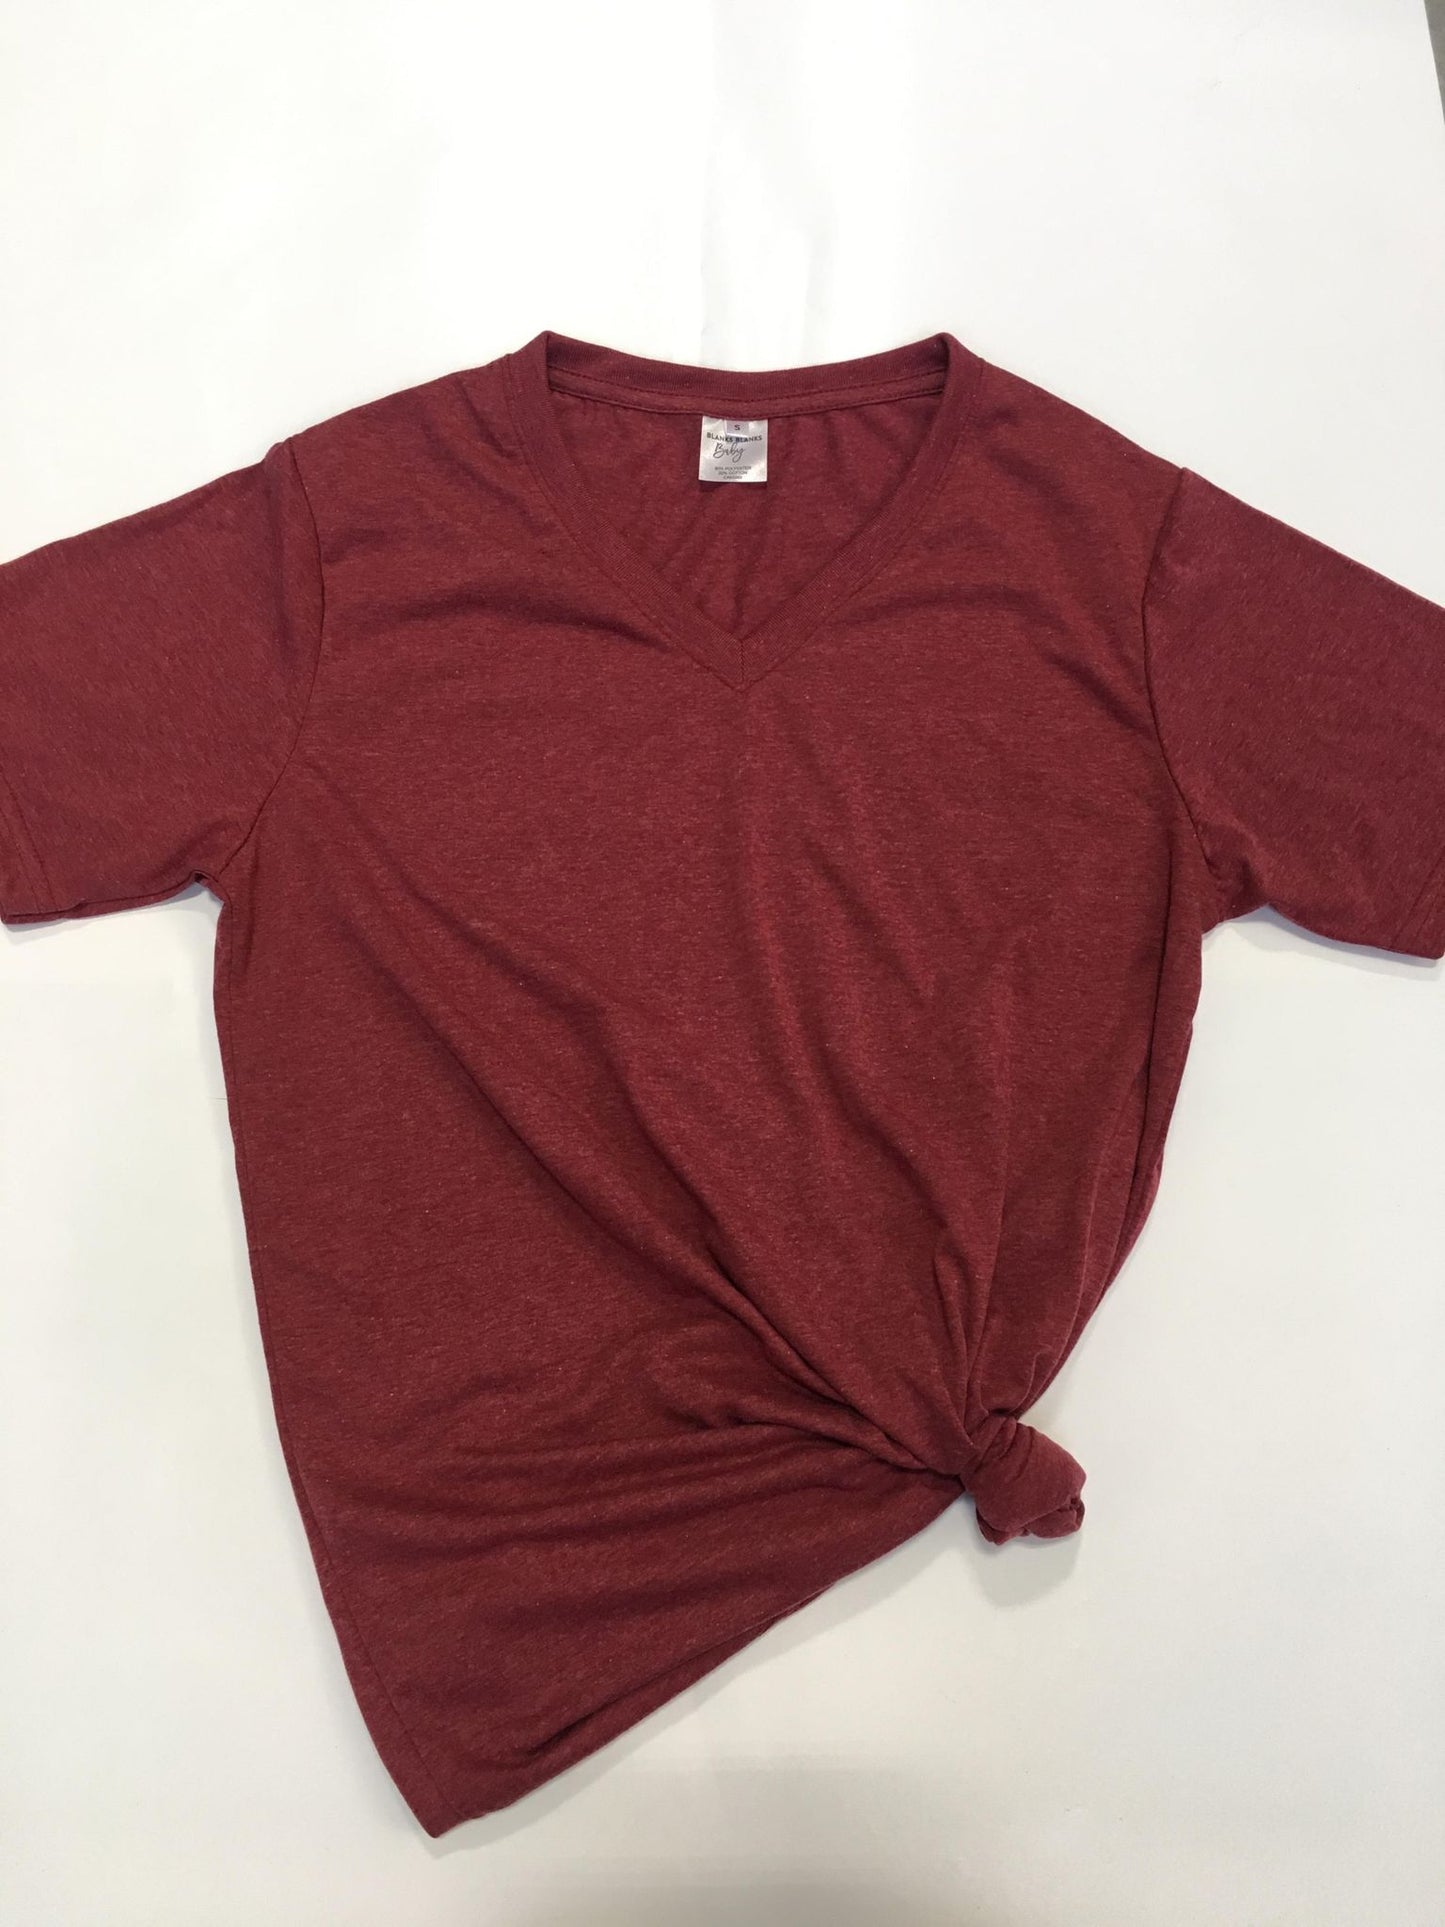 V-Neck Adult Tee Heathered Colours - 80/20 Poly Cotton Blend - In Stock